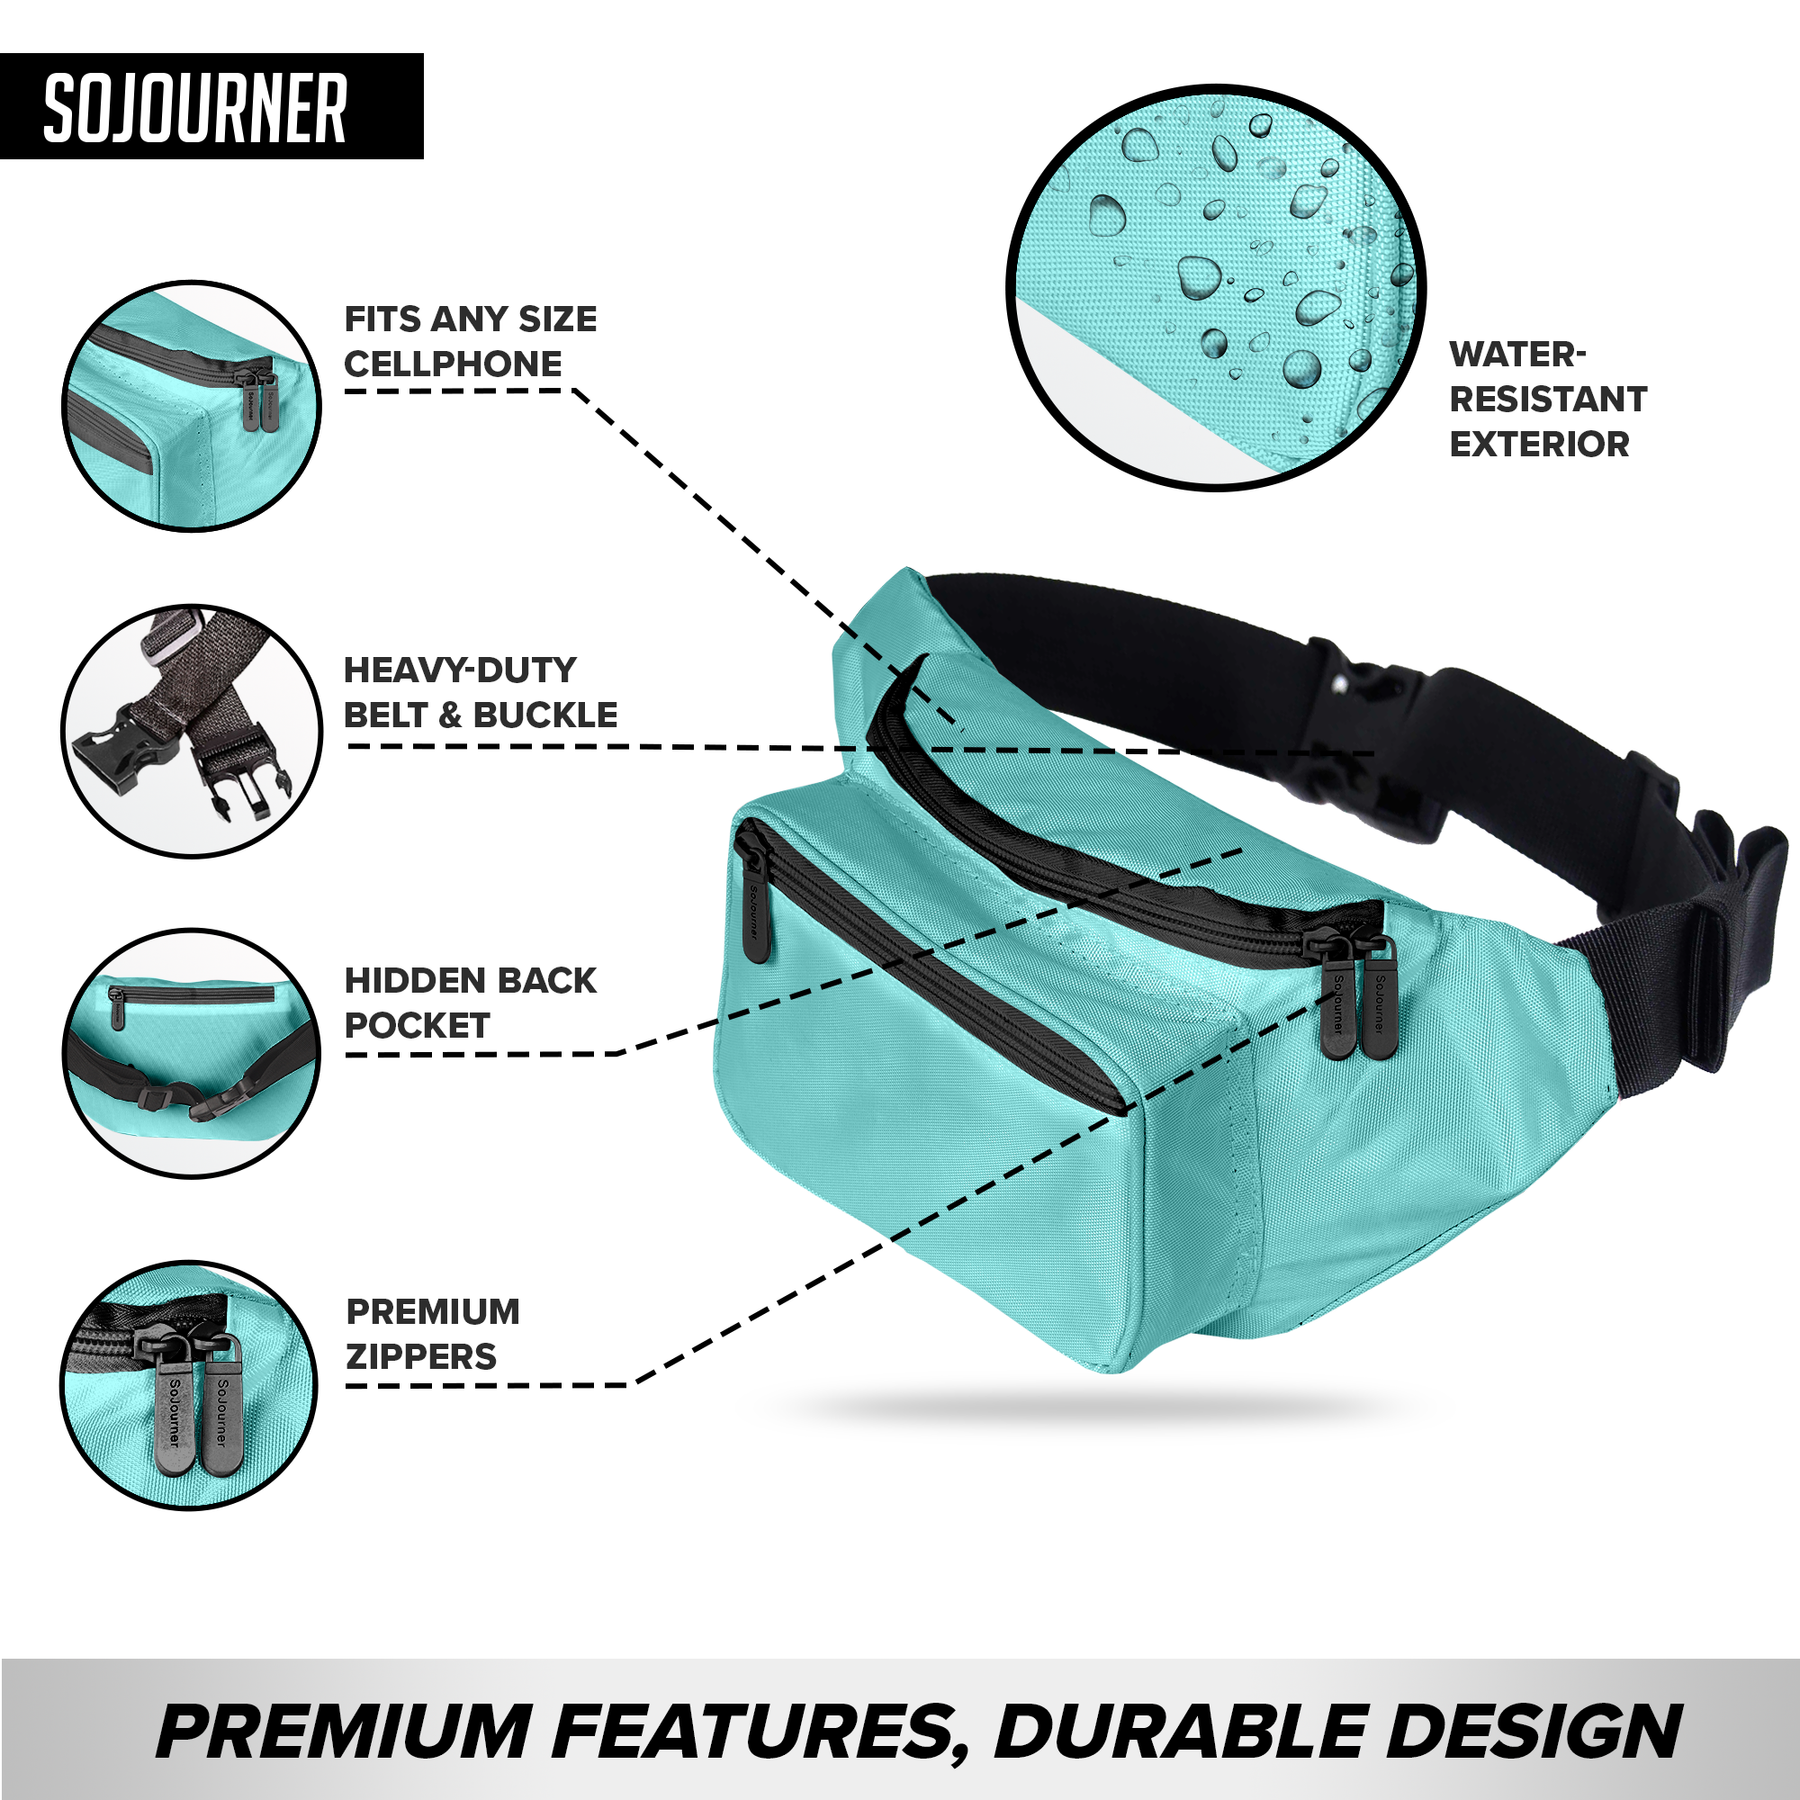 Solid Color Fanny Pack (Teal)